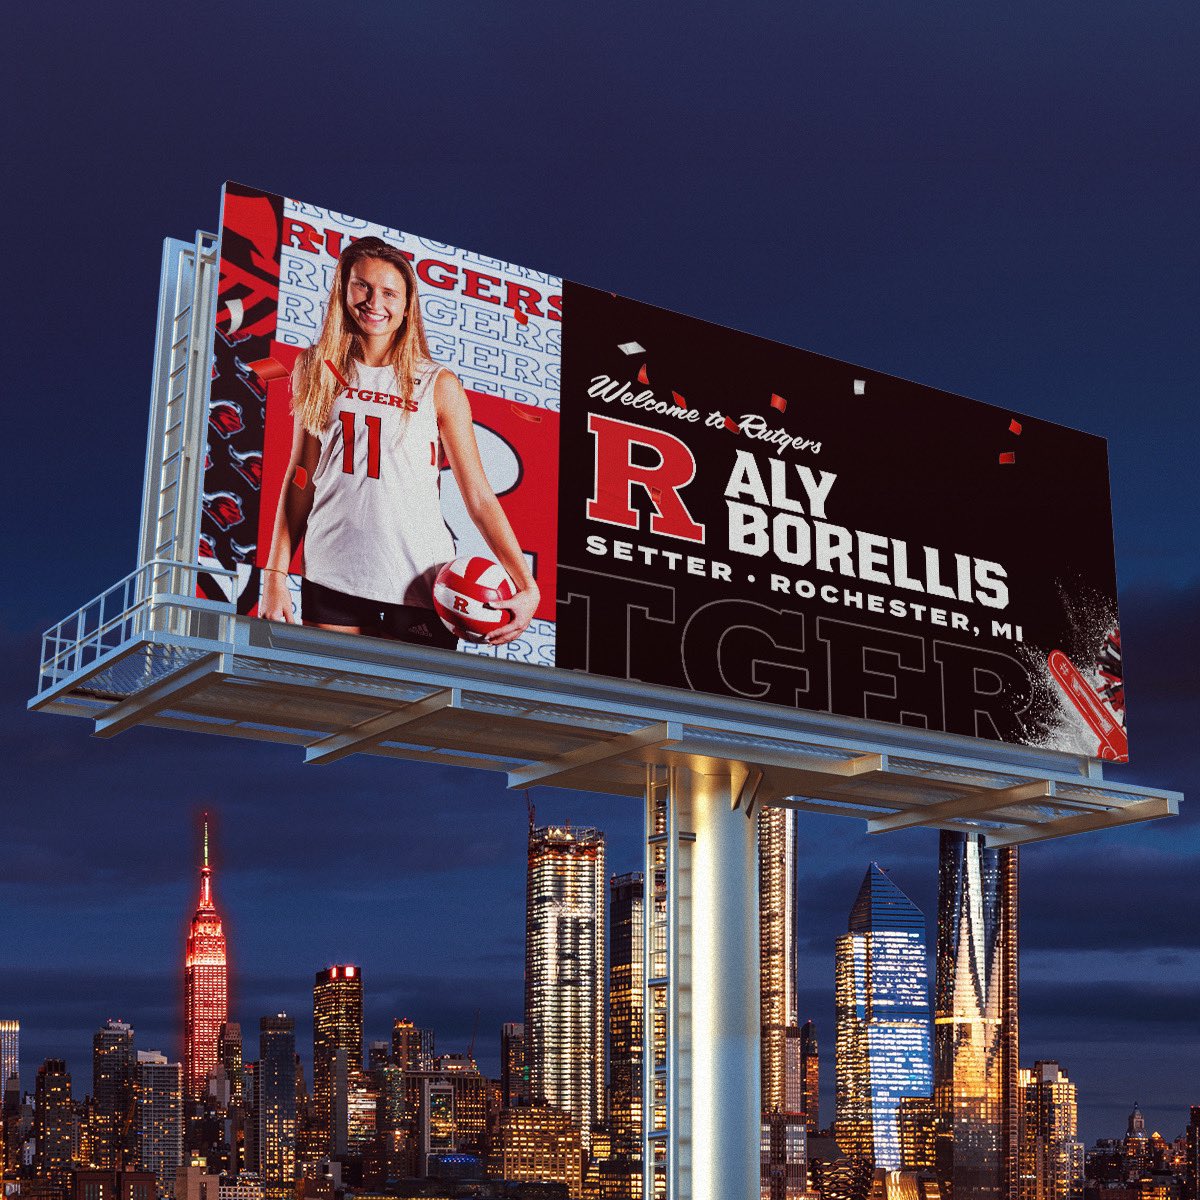 🗣️ 𝐖𝐄𝐋𝐂𝐎𝐌𝐄 𝐓𝐎 𝐓𝐇𝐄 𝐁𝐀𝐍𝐊𝐒 ✍️ Aly Borellis 🏐 Setter 🏠 Rochester, Michigan 🏫 Notre Dame Prep | Ole Miss 🛡️ ⚔️ Welcome To R Family ⚔️ 🛡️